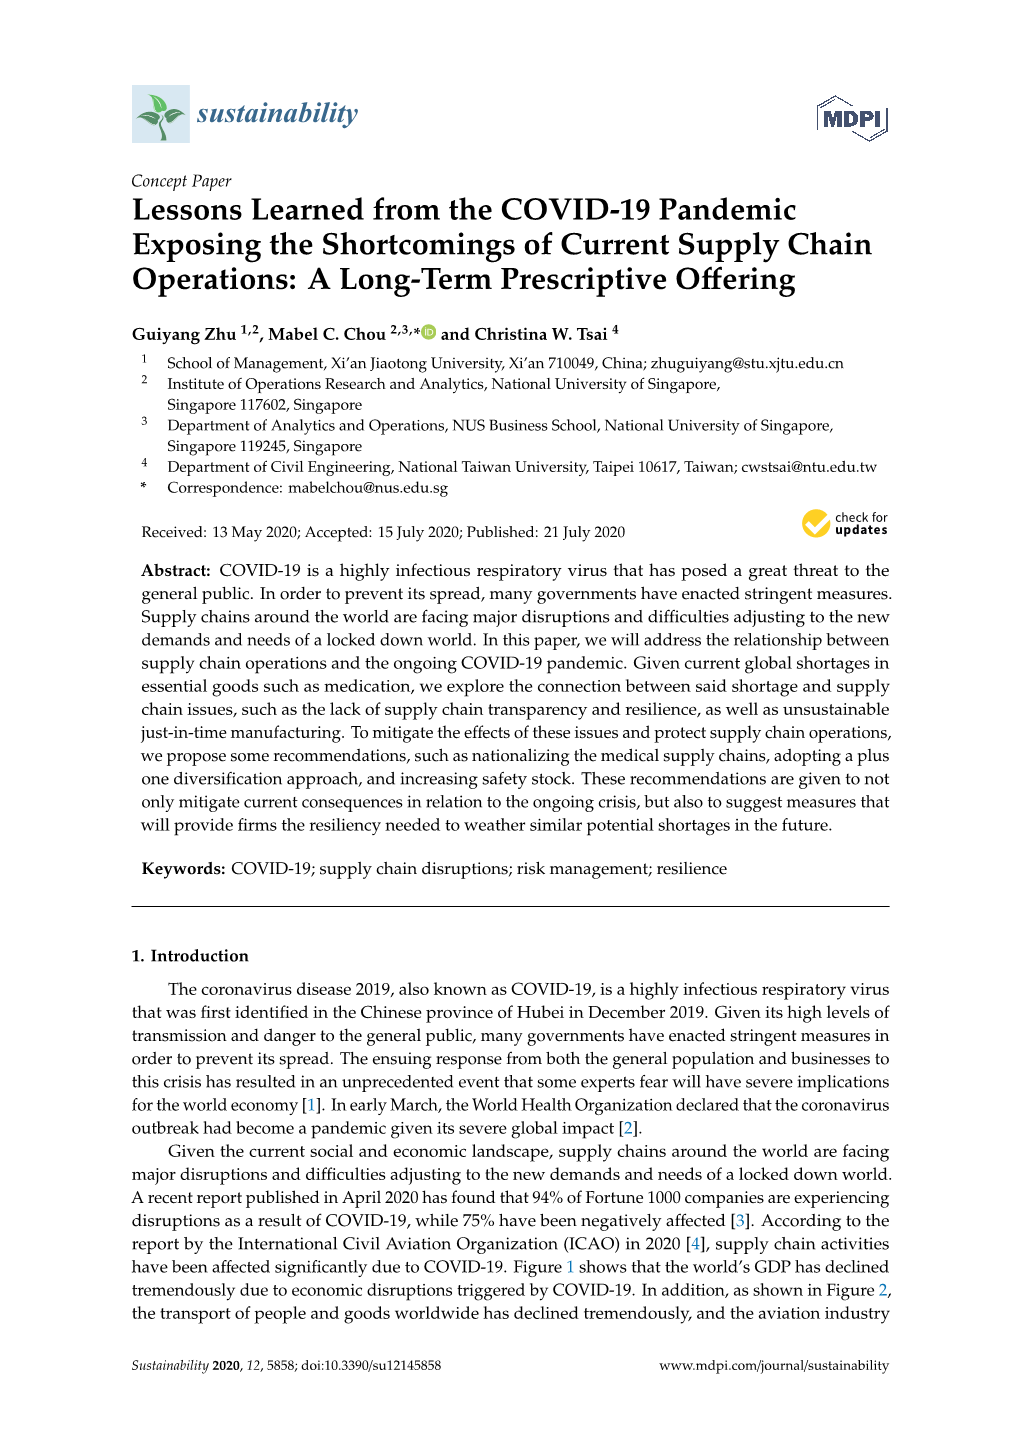 Lessons Learned from the COVID-19 Pandemic Exposing the Shortcomings of Current Supply Chain Operations: a Long-Term Prescriptive Oﬀering